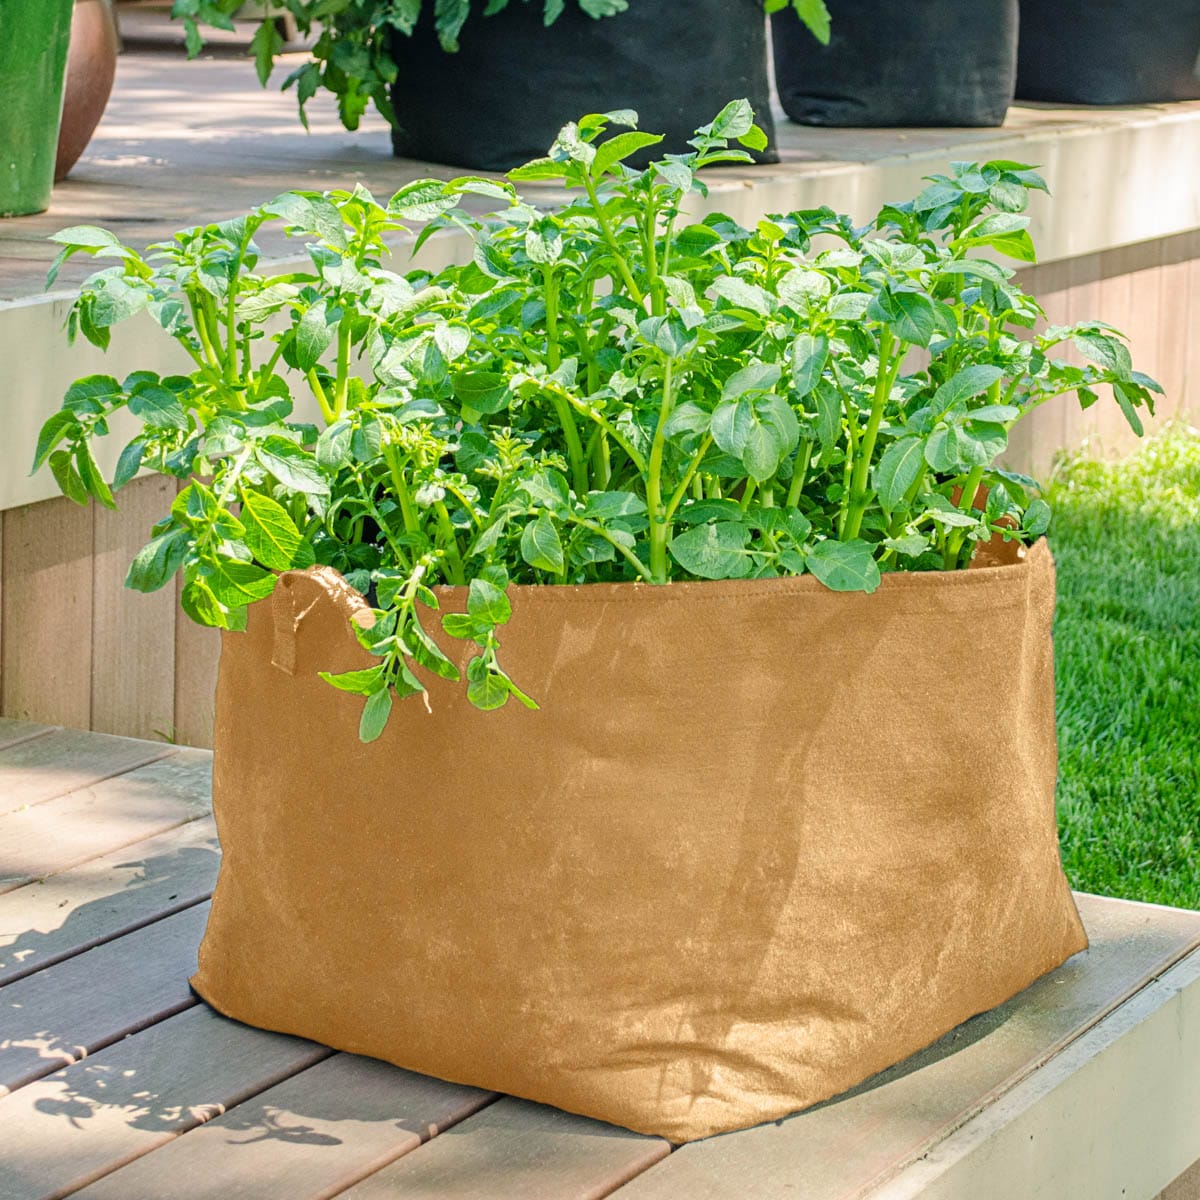 Gardens Alive! Seed Starting Heat Mat, Square Shape, Indoor Use, 10x20  Inches, Speeds Germination, Easy to Use